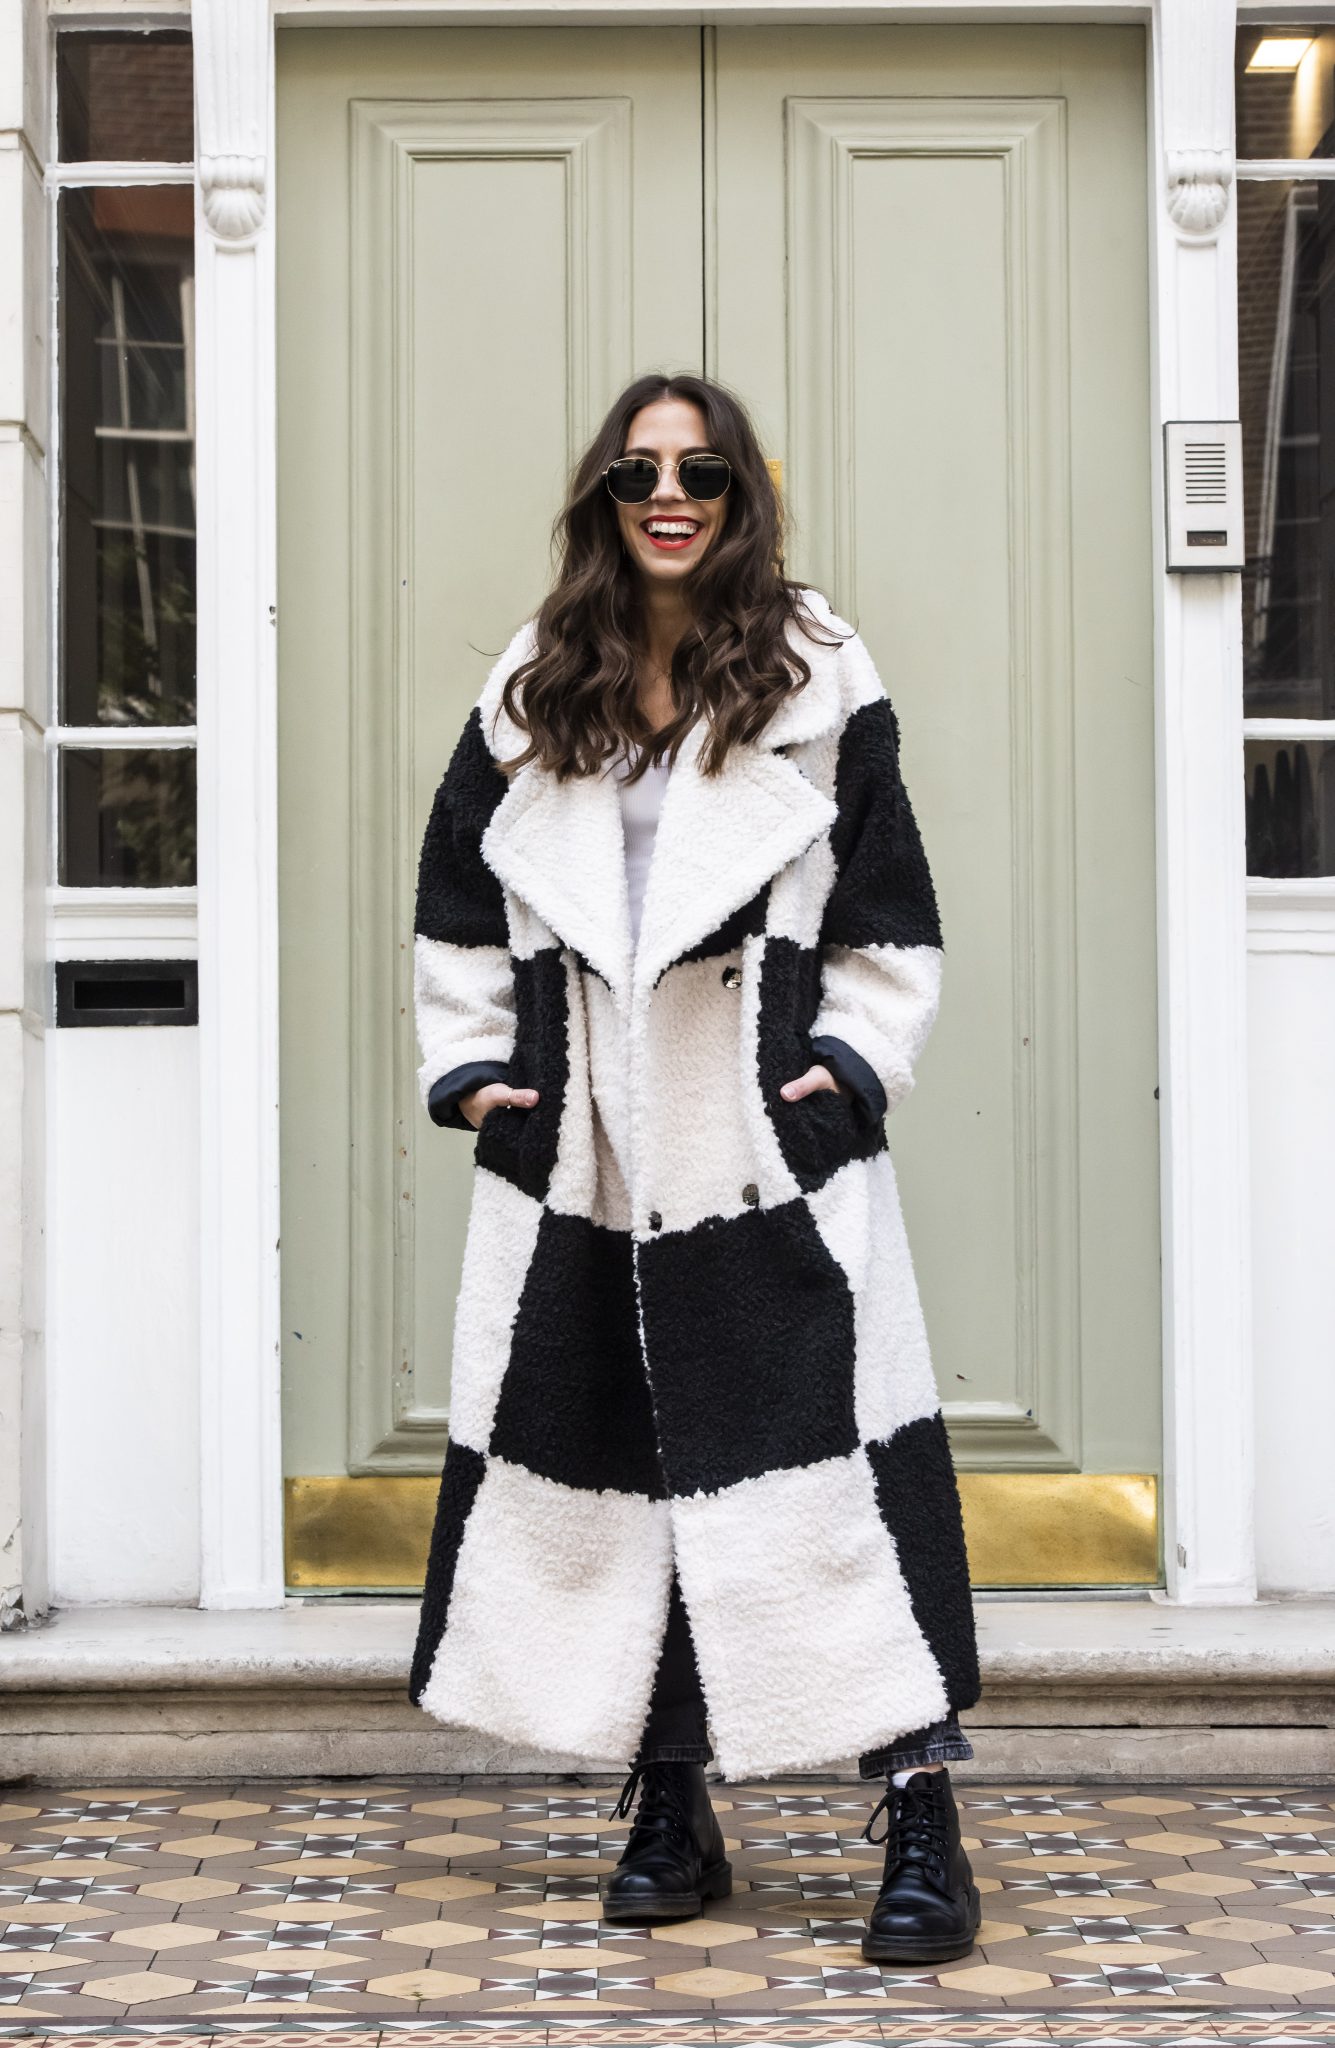 24 OF THE BEST COATS ON THE HIGH STREET